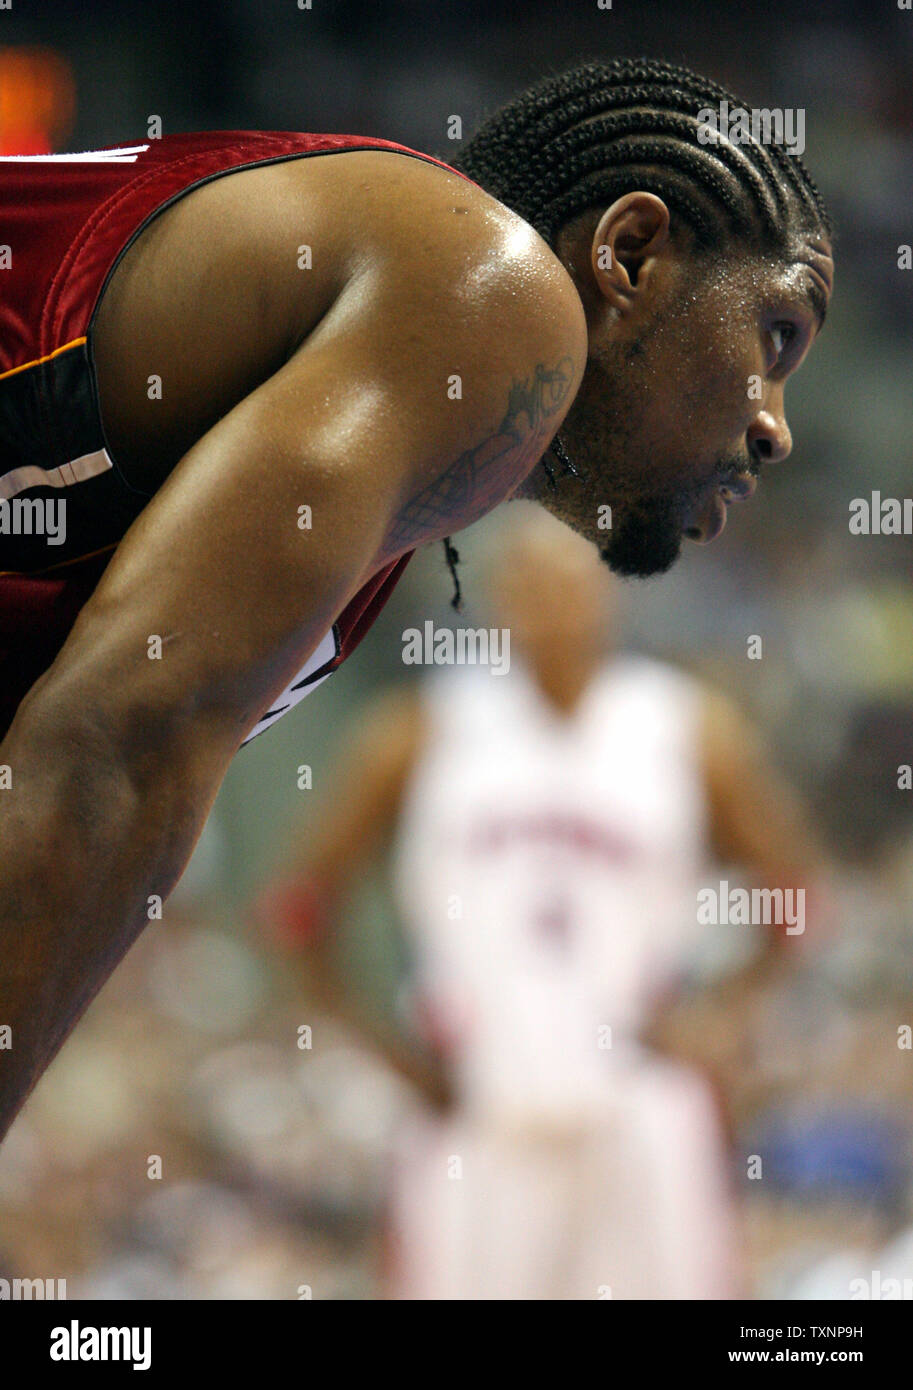 Miami Heat forward Udonis Haslem waits for foul shots by the Detroit Pistons in the third quarter at The Palace of Auburn Hills in Auburn Hills, Mi on May 31, 2006. The Pistons defeated the Heat 91-78 to win game five of the Eastern Conference Finals. (UPI Photo/Scott R. Galvin) Stock Photo